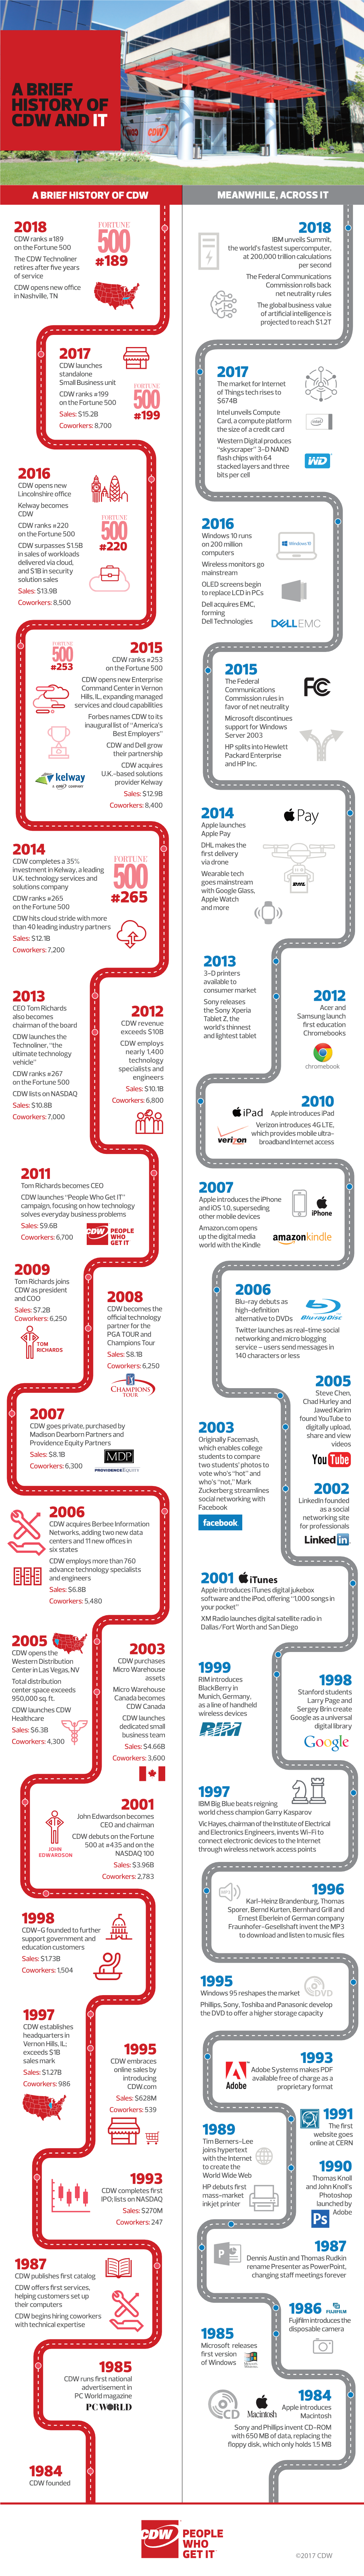 A Brief History of Cdw Andit